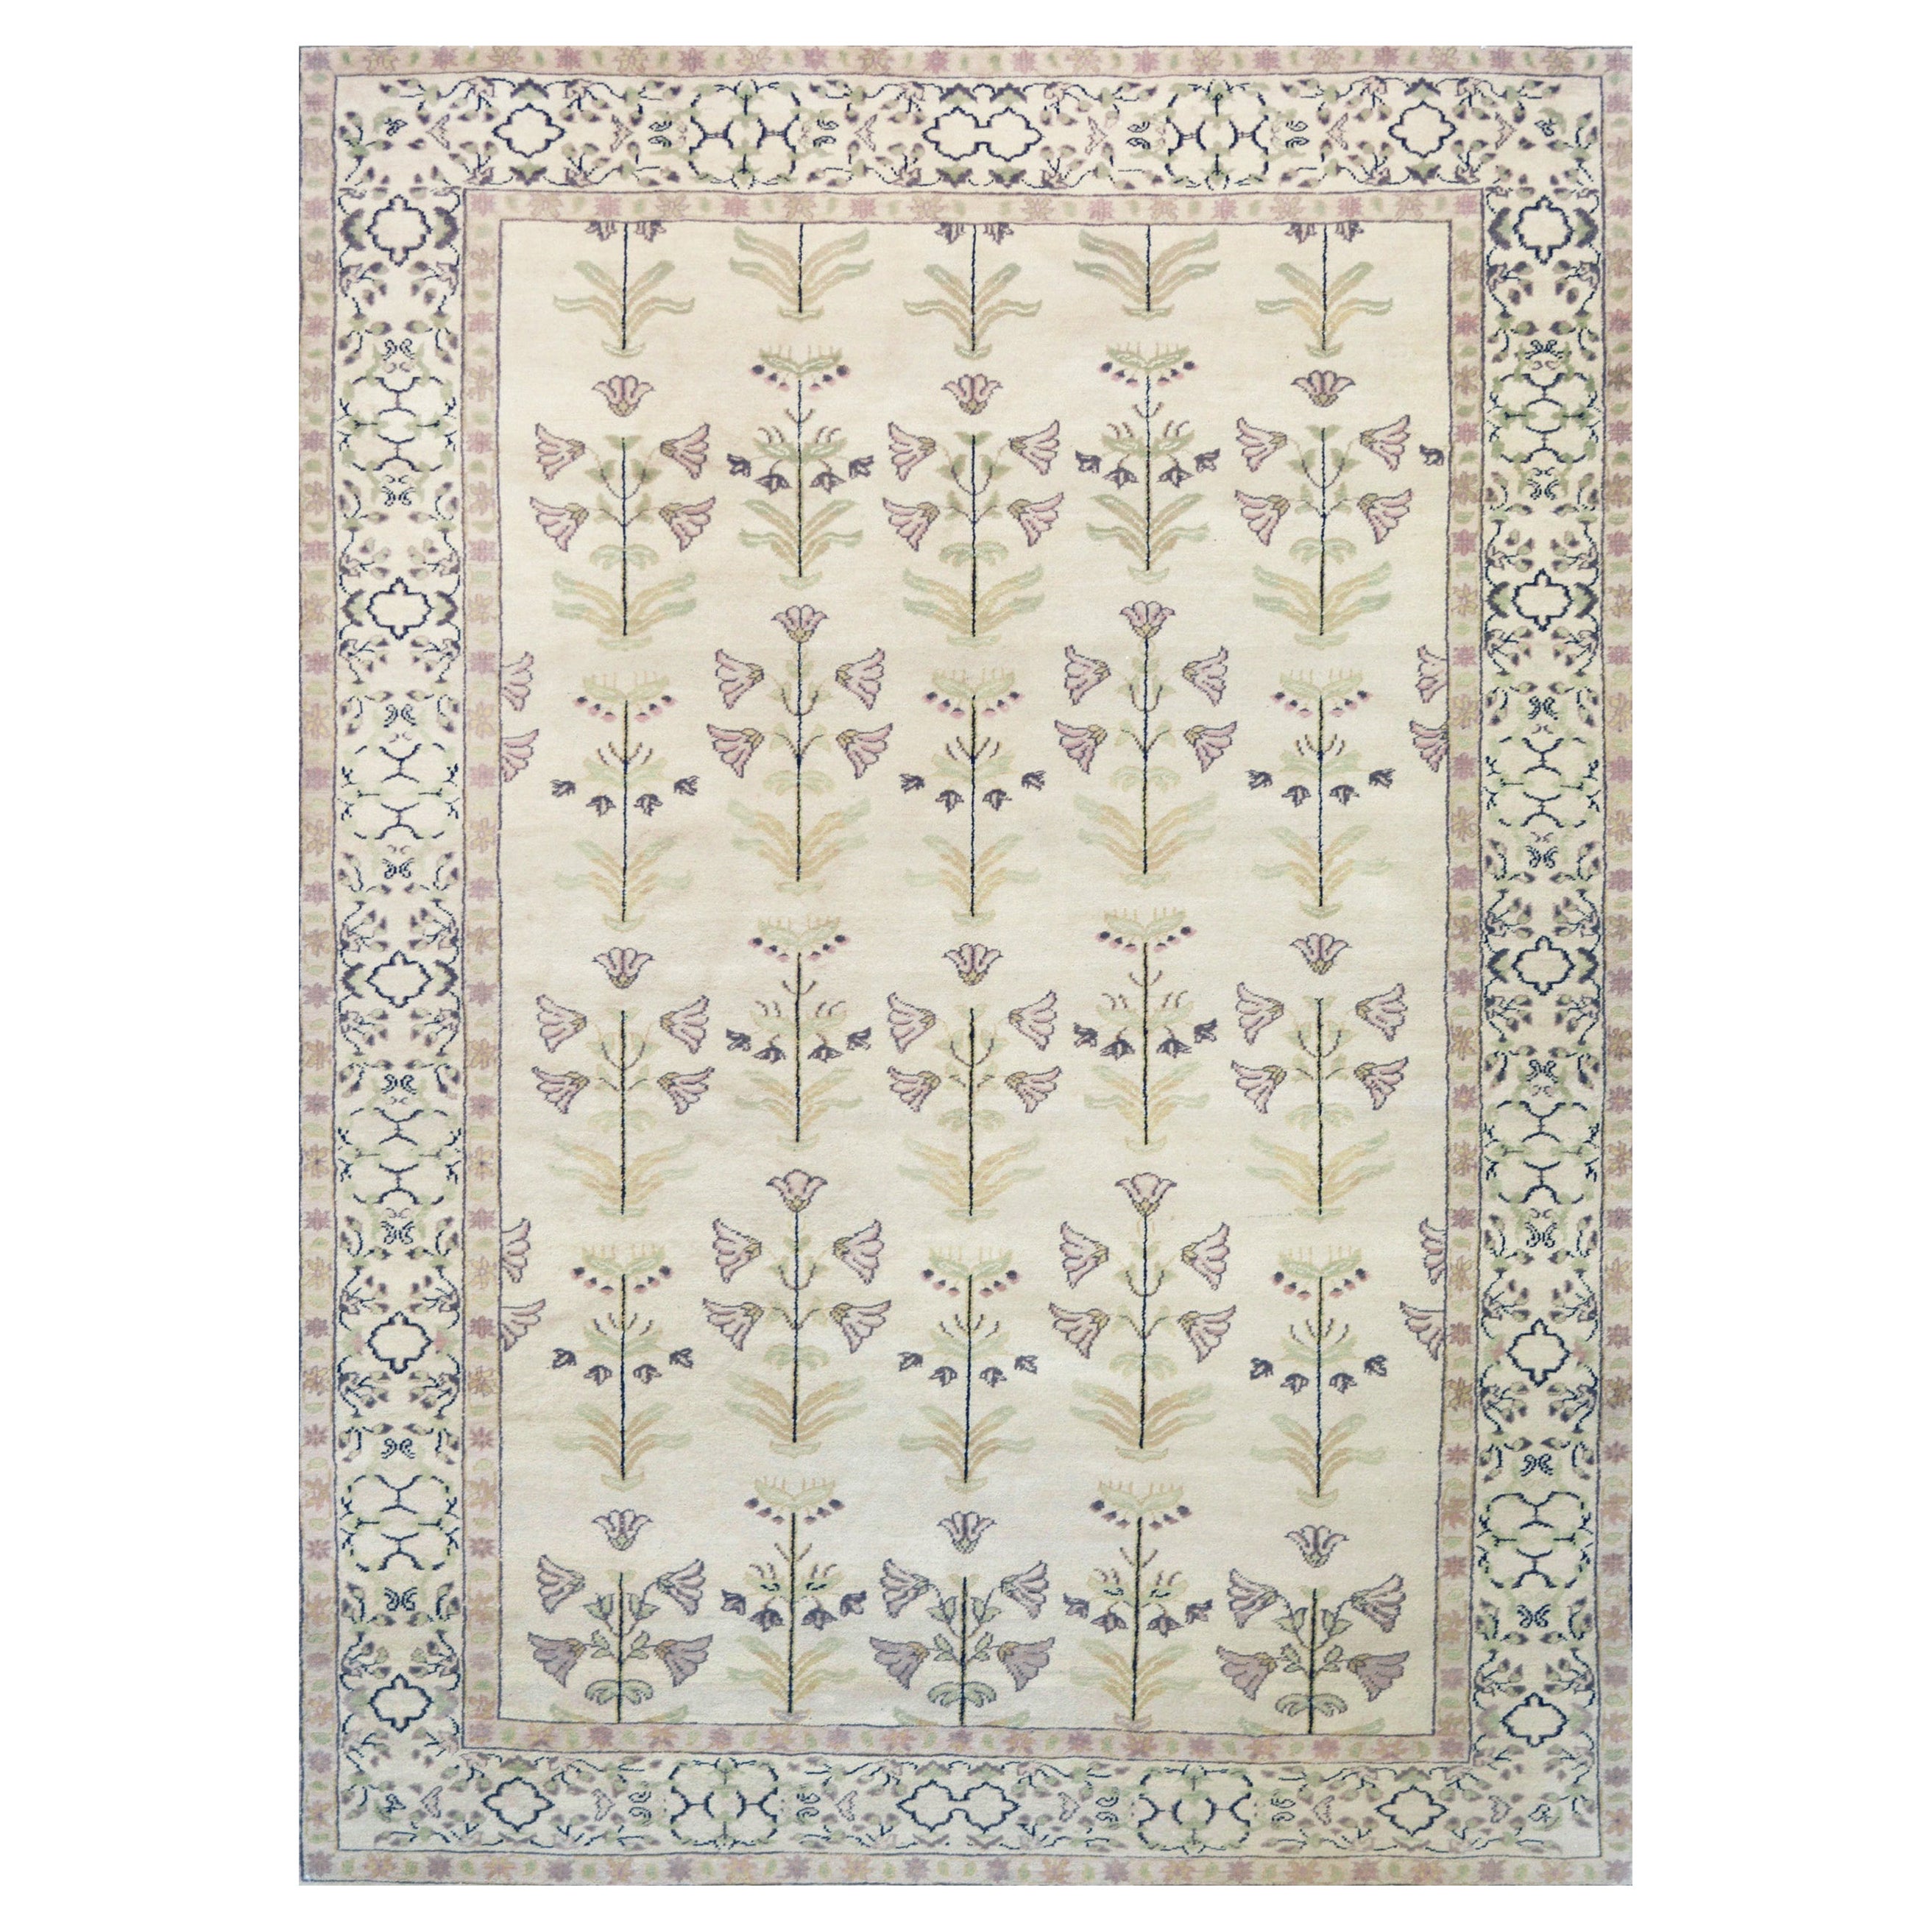 Handwoven Floral Agra-Inspired Design on 100% Natural Wool For Sale